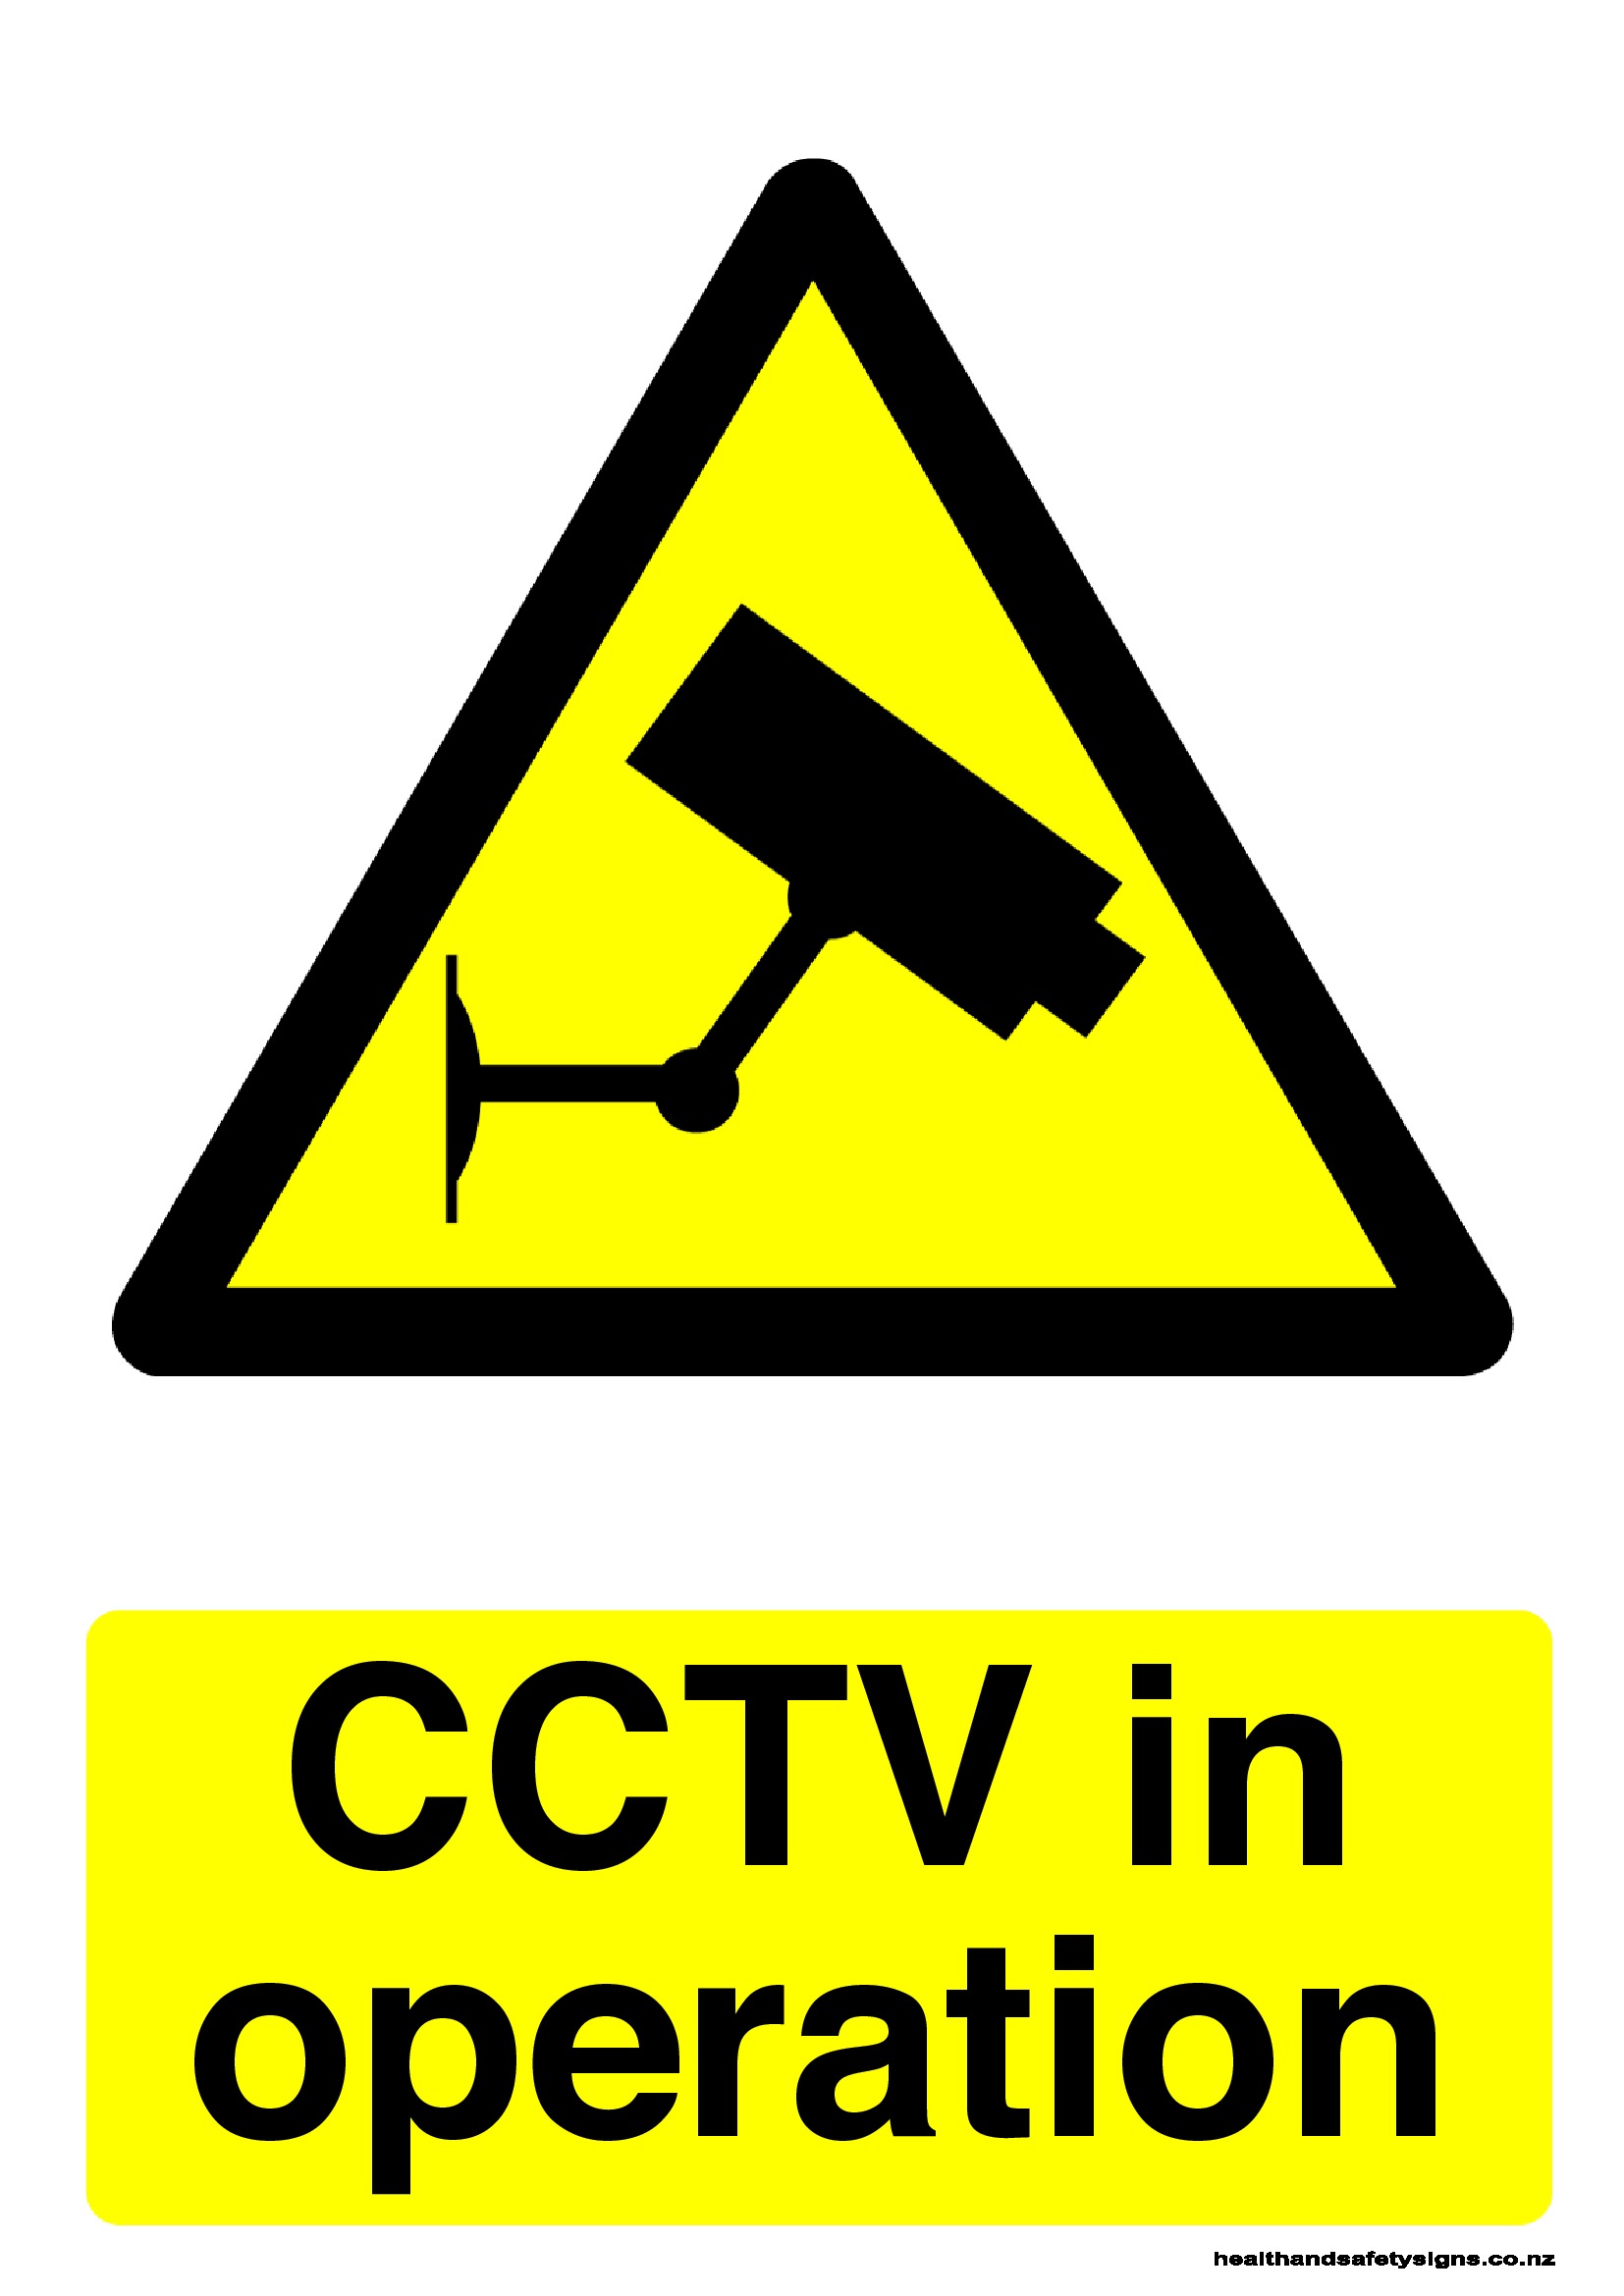 CCTV in operation warning sign Health and Safety Signs